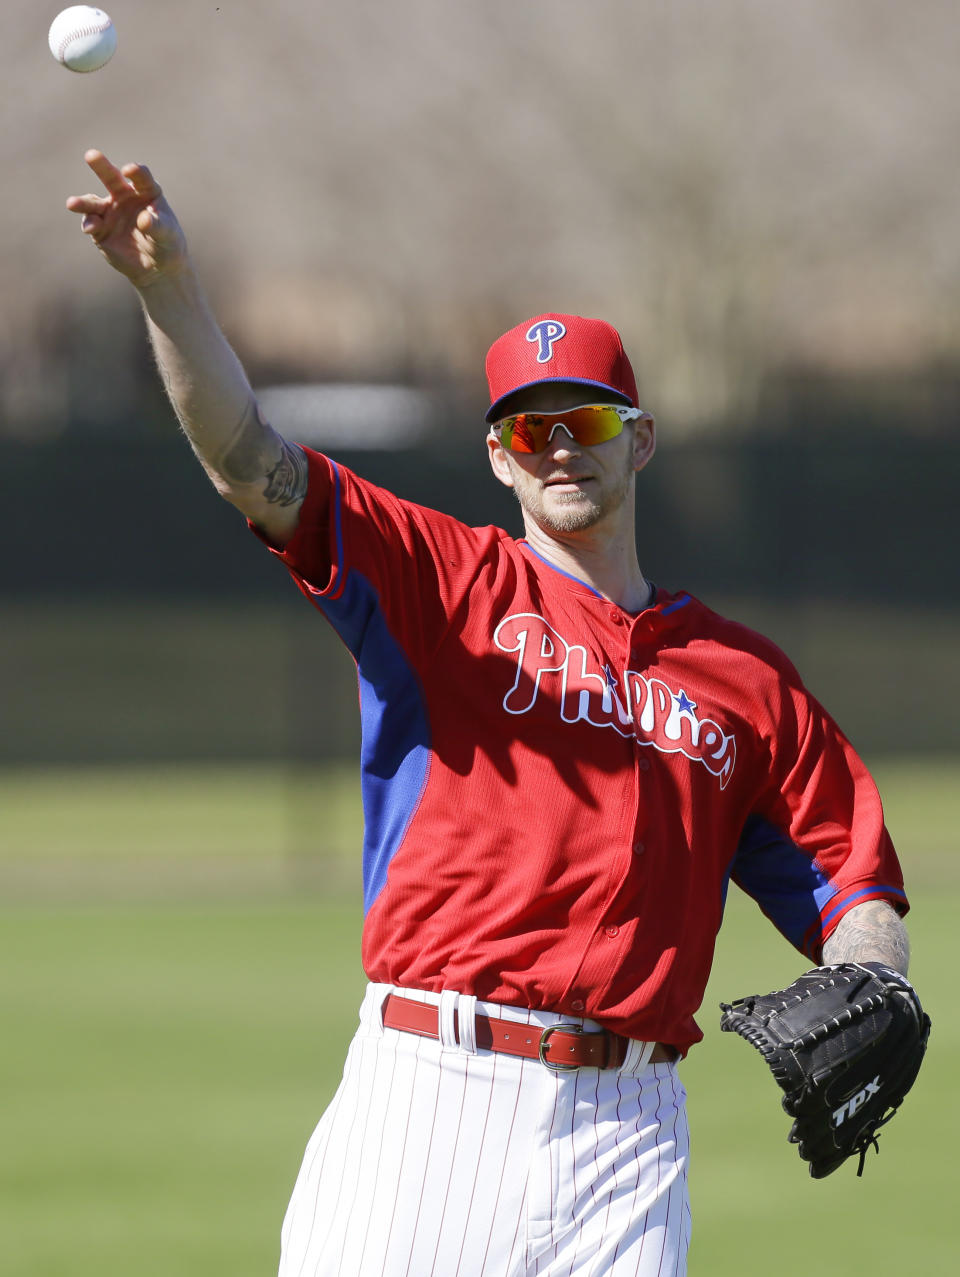 Philadelphia Phillies pitcher A.J. Burnett throws the ball in the outfield during spring training baseball practice on Sunday, Feb. 16, 2014, in Clearwater, Fla. (AP Photo/Charlie Neibergall)